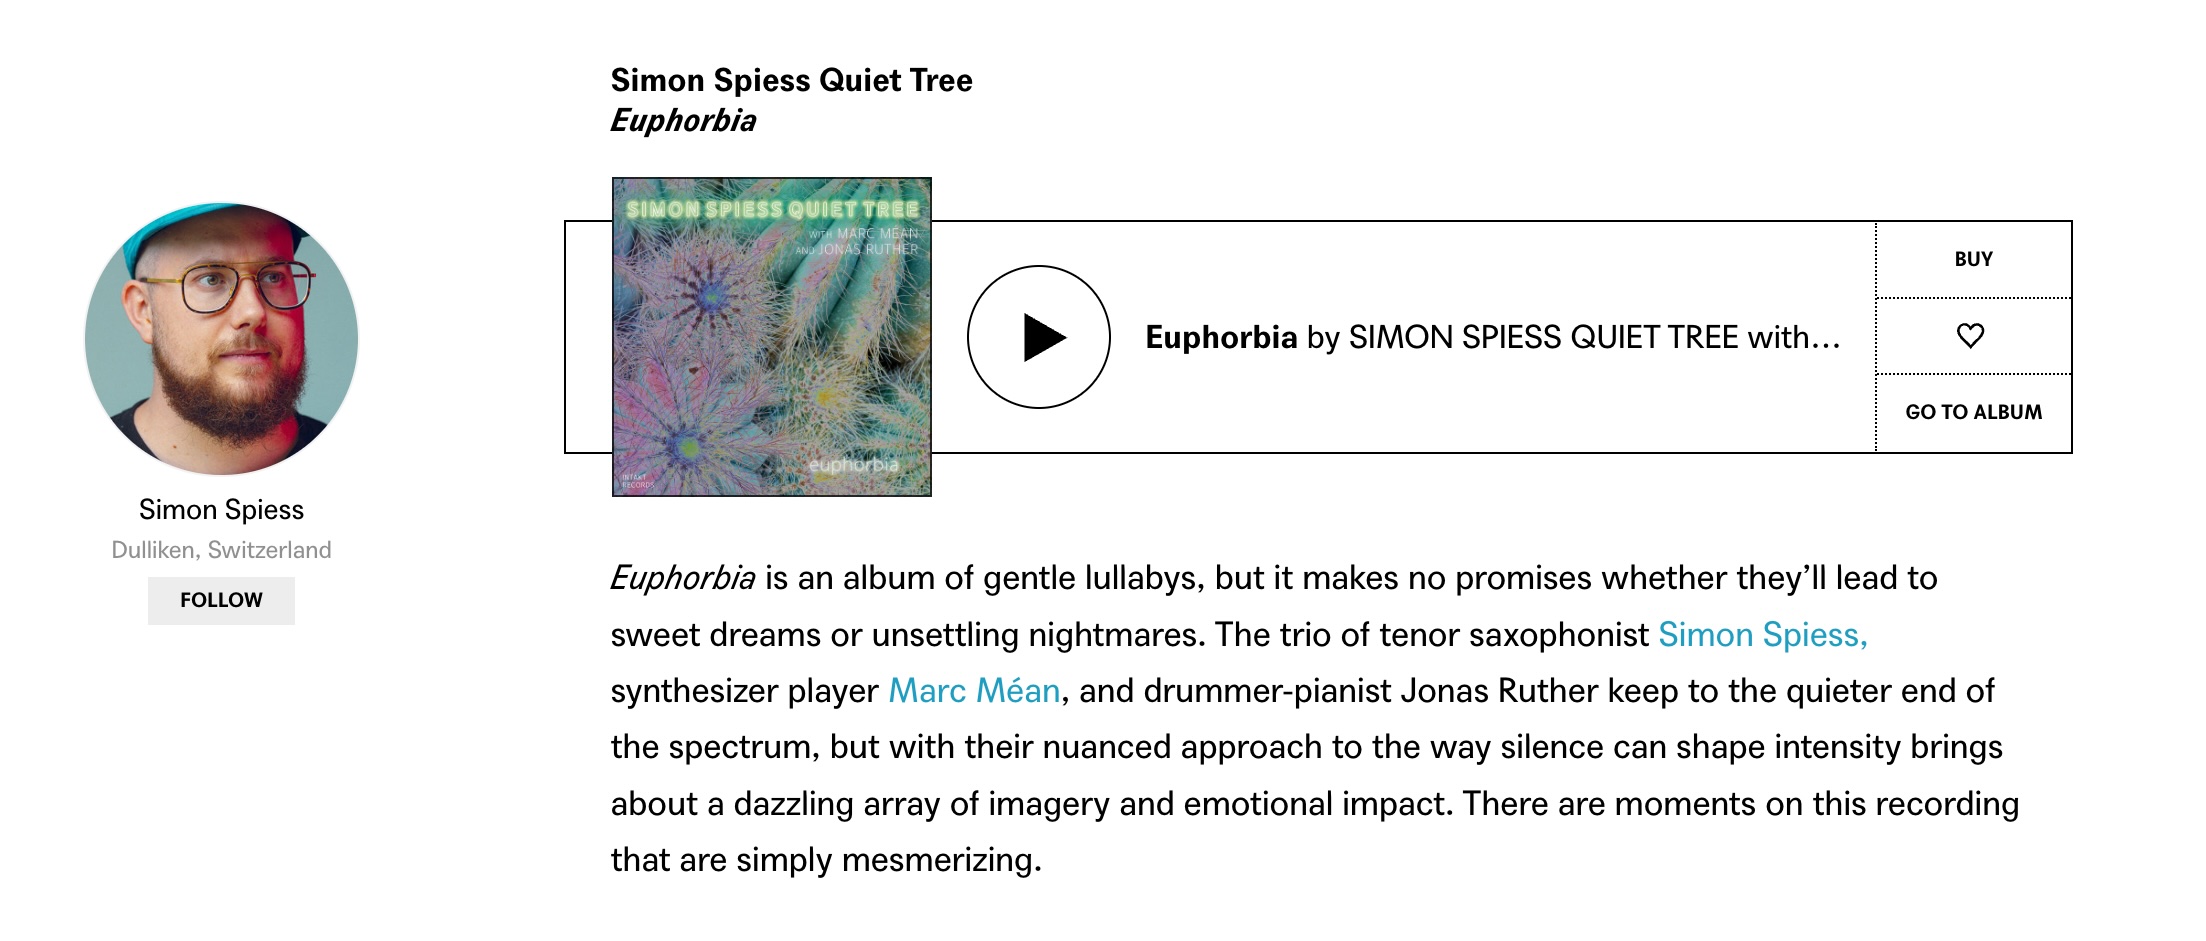 Euphorbia is an album of gentle lullabys, but it makes no promises whether they’ll lead to sweet dreams or unsettling nightmares. The trio of tenor saxophonist Simon Spiess, synthesizer player Marc Méan, and drummer-pianist Jonas Ruther keep to the quieter end of the spectrum, but with their nuanced approach to the way silence can shape intensity brings about a dazzling array of imagery and emotional impact. There are moments on this recording that are simply mesmerizing.